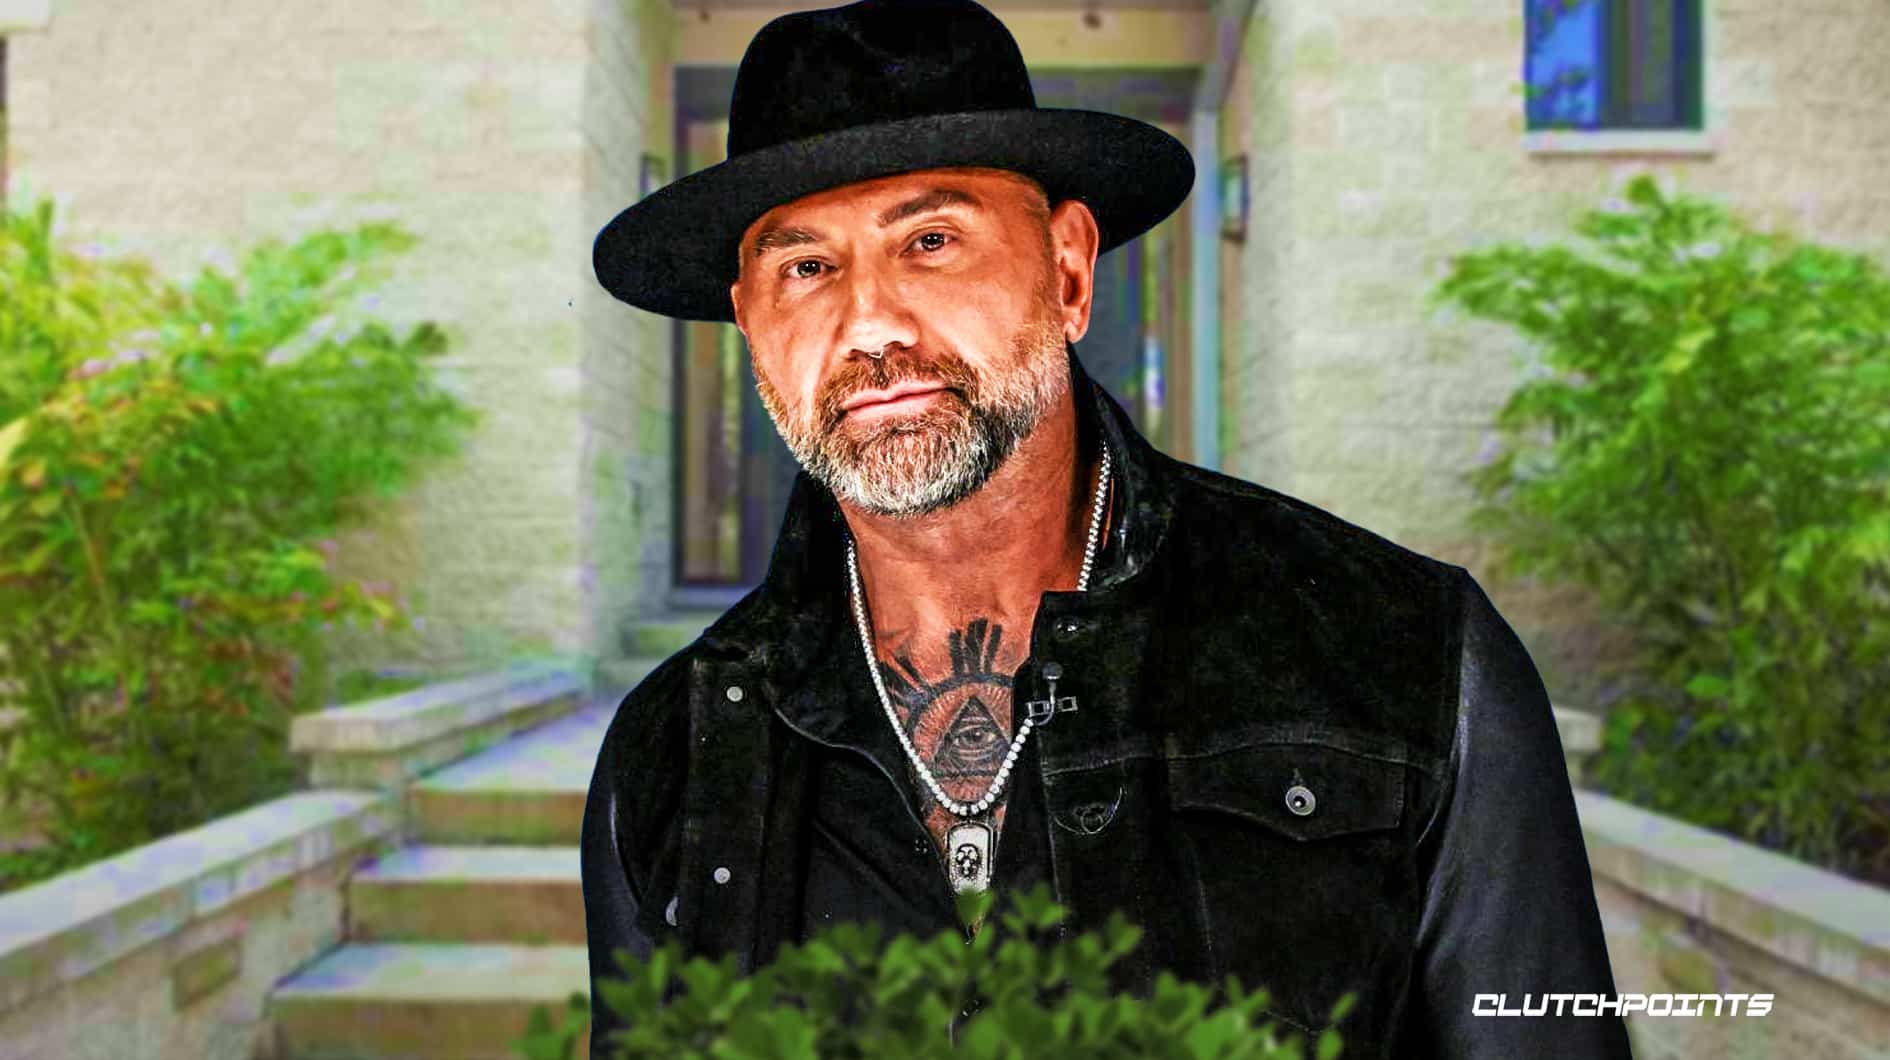 Dave Bautista Shared Photos of His Physique Through the Years